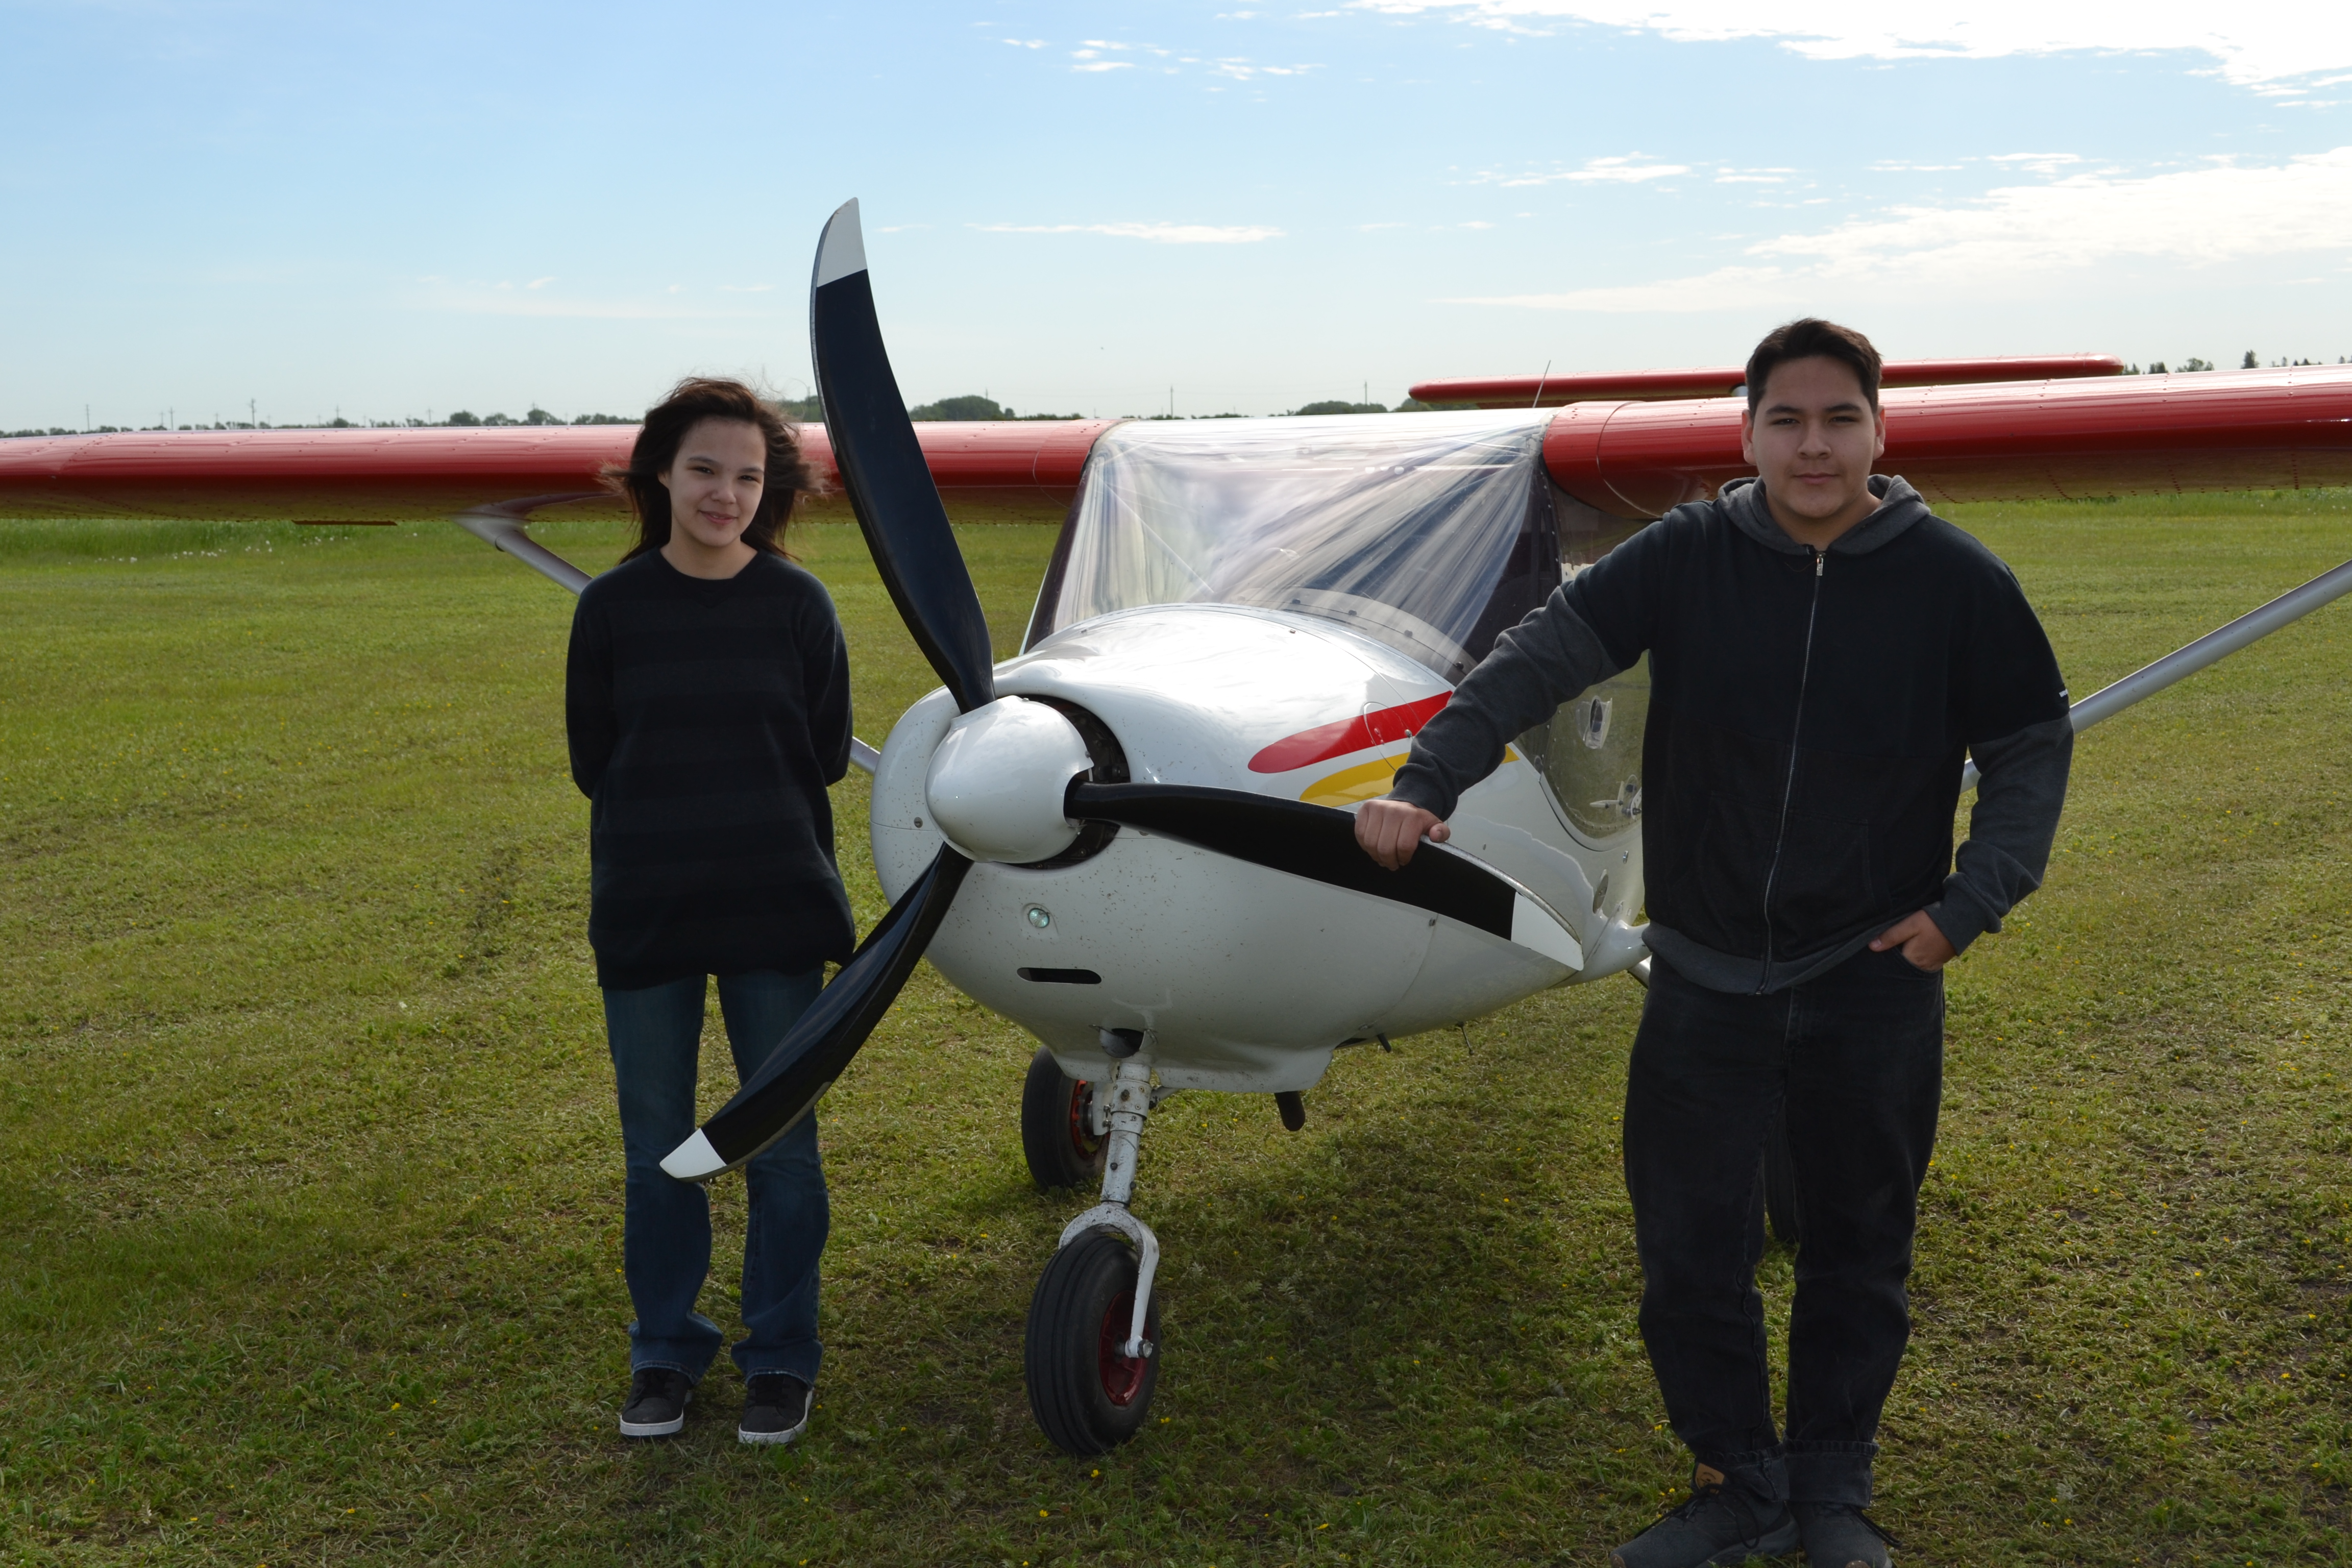 Build students Nya Hartie from Dakota Plains Wahpeton First Nation, and Adrian James-Stagg of Dakota Tipi First Nation each had an opportunity to fly over their homes and communities with EWFS’ flight instructors.